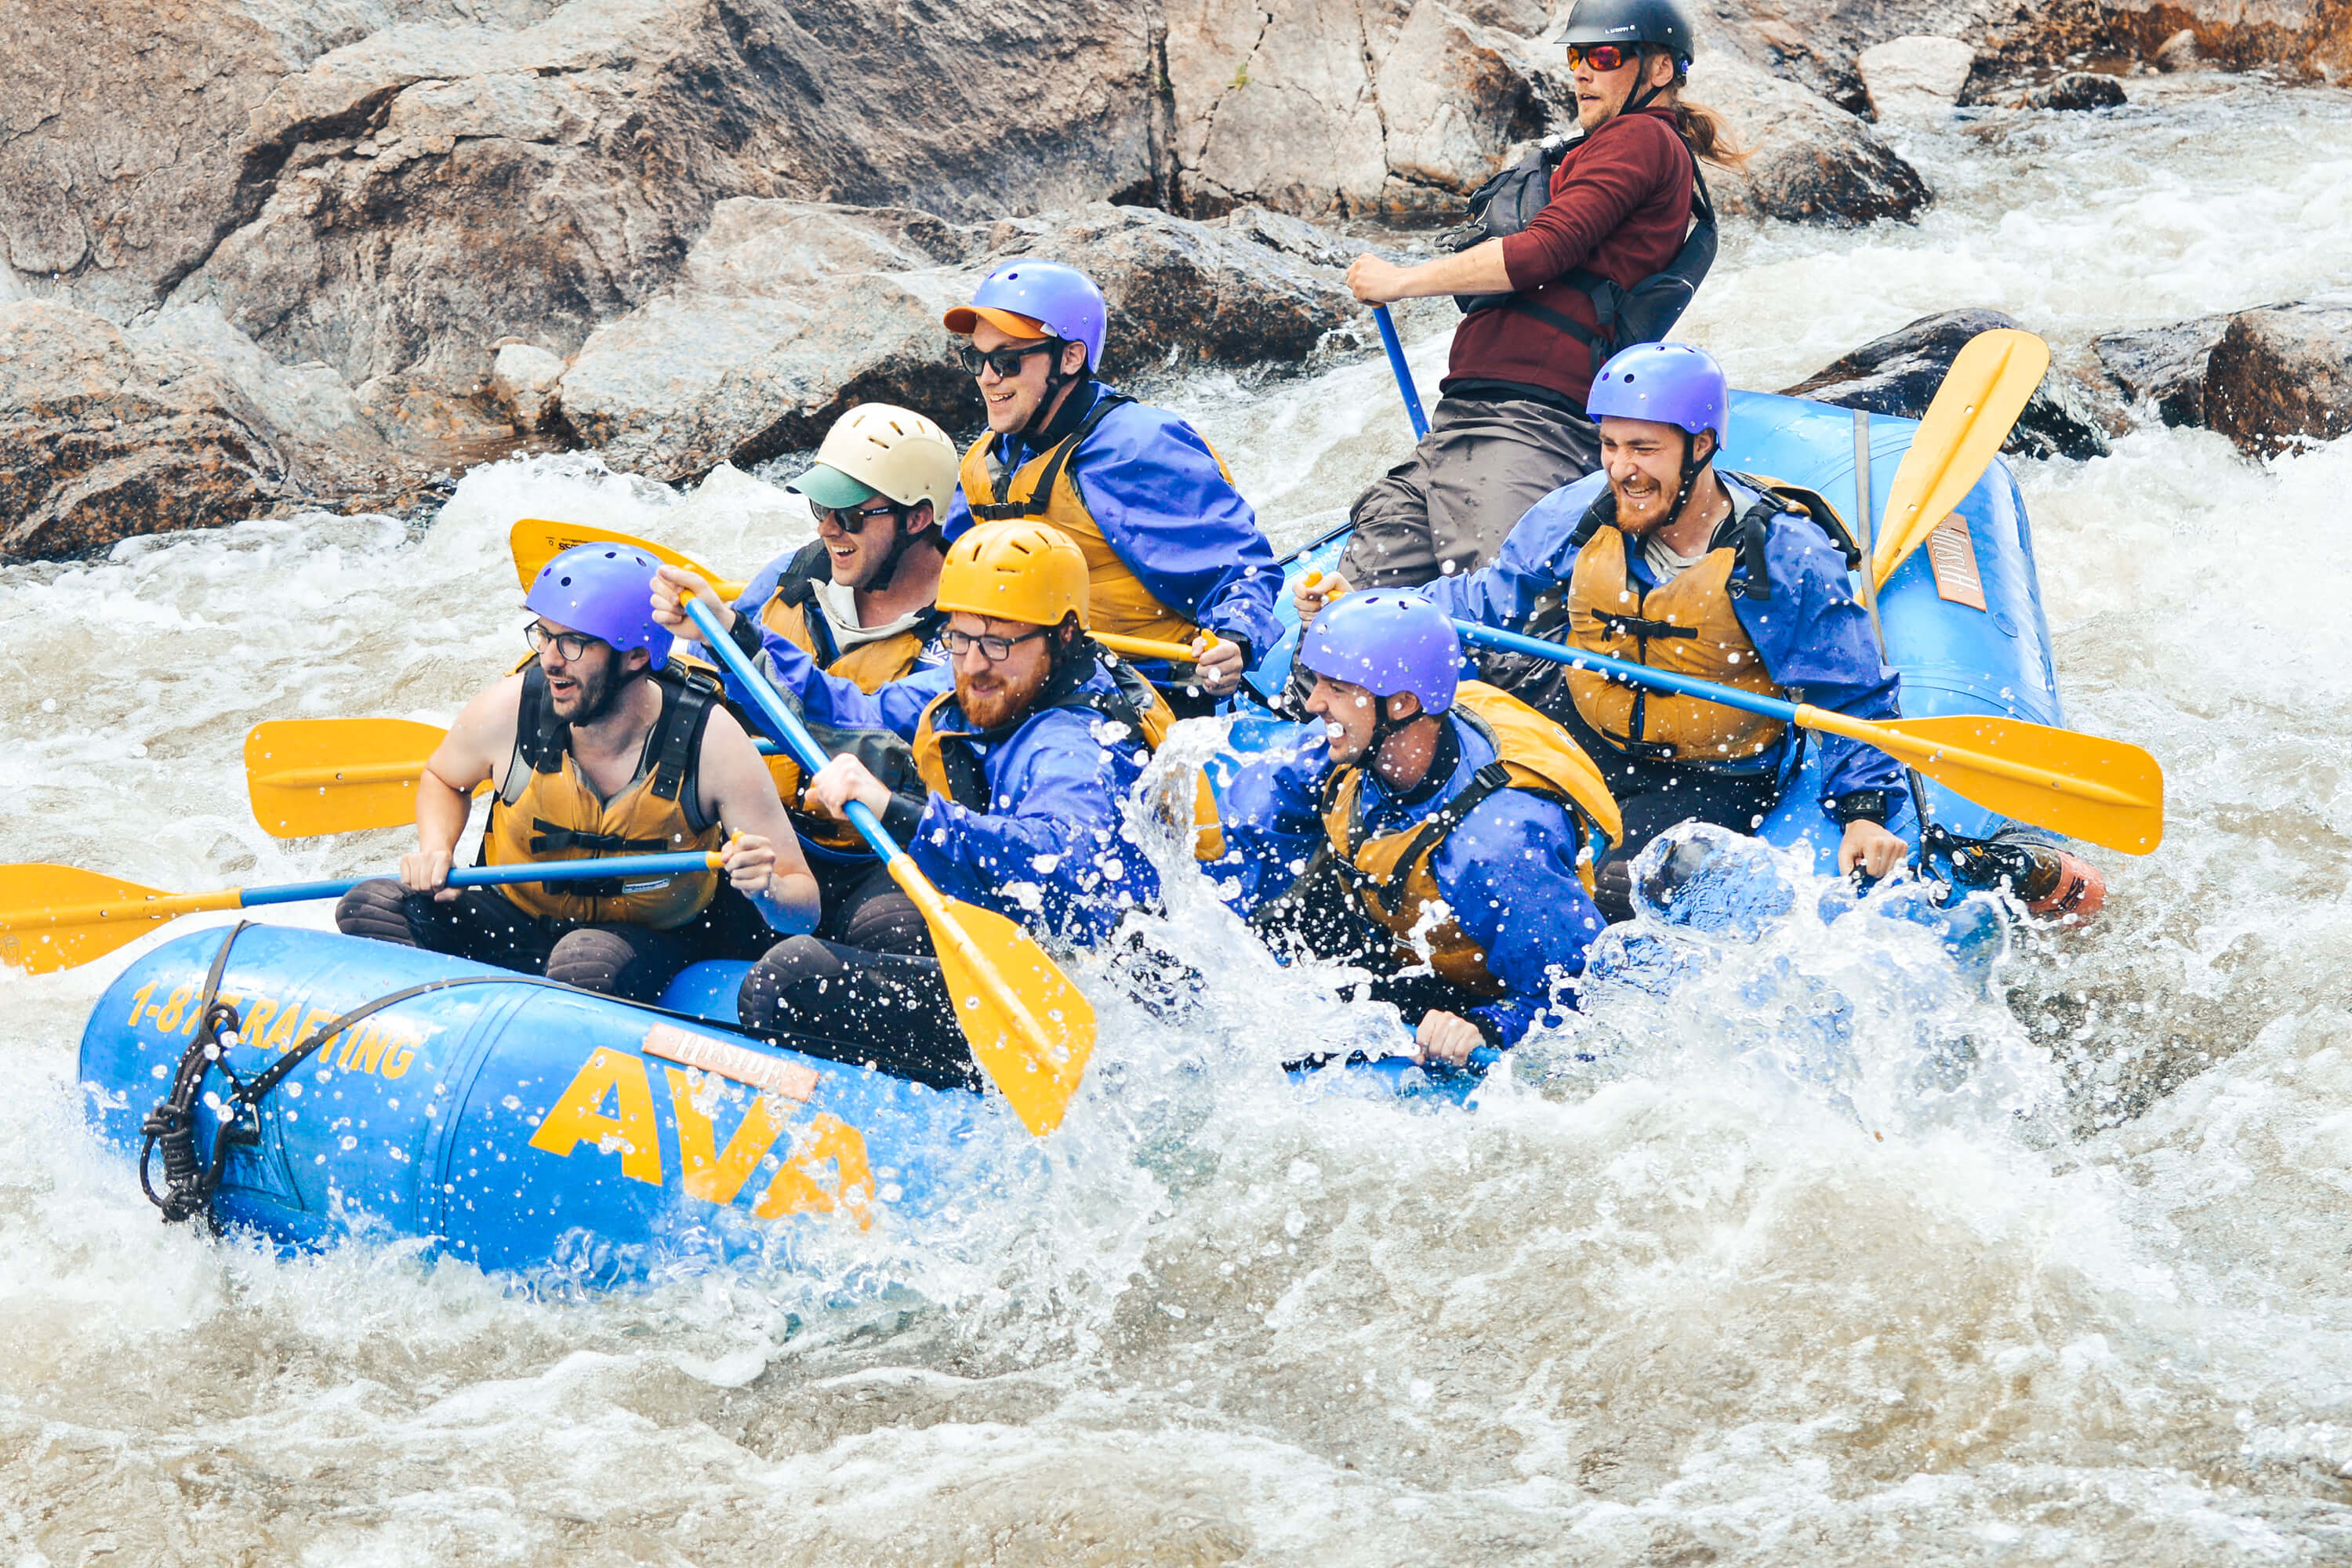 A group in a raft getting splashed while rafting through a rapid